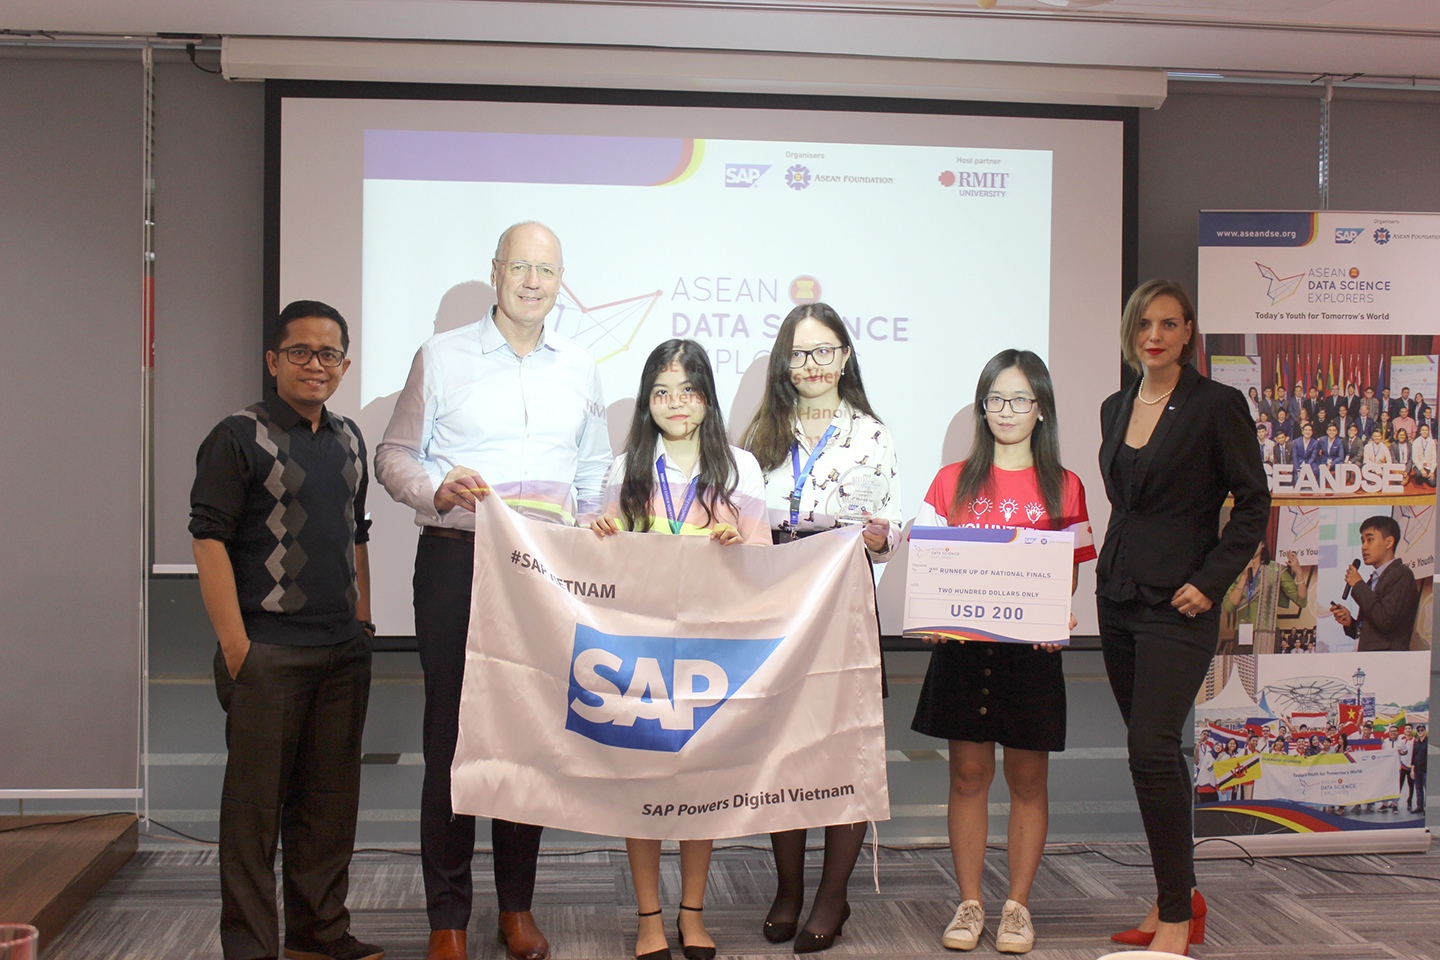 RMIT students Ngo Thi Minh Thu and Tran Phuong Thao (team Data Miners) presented on affordable surgical costs and won third place in the competition.